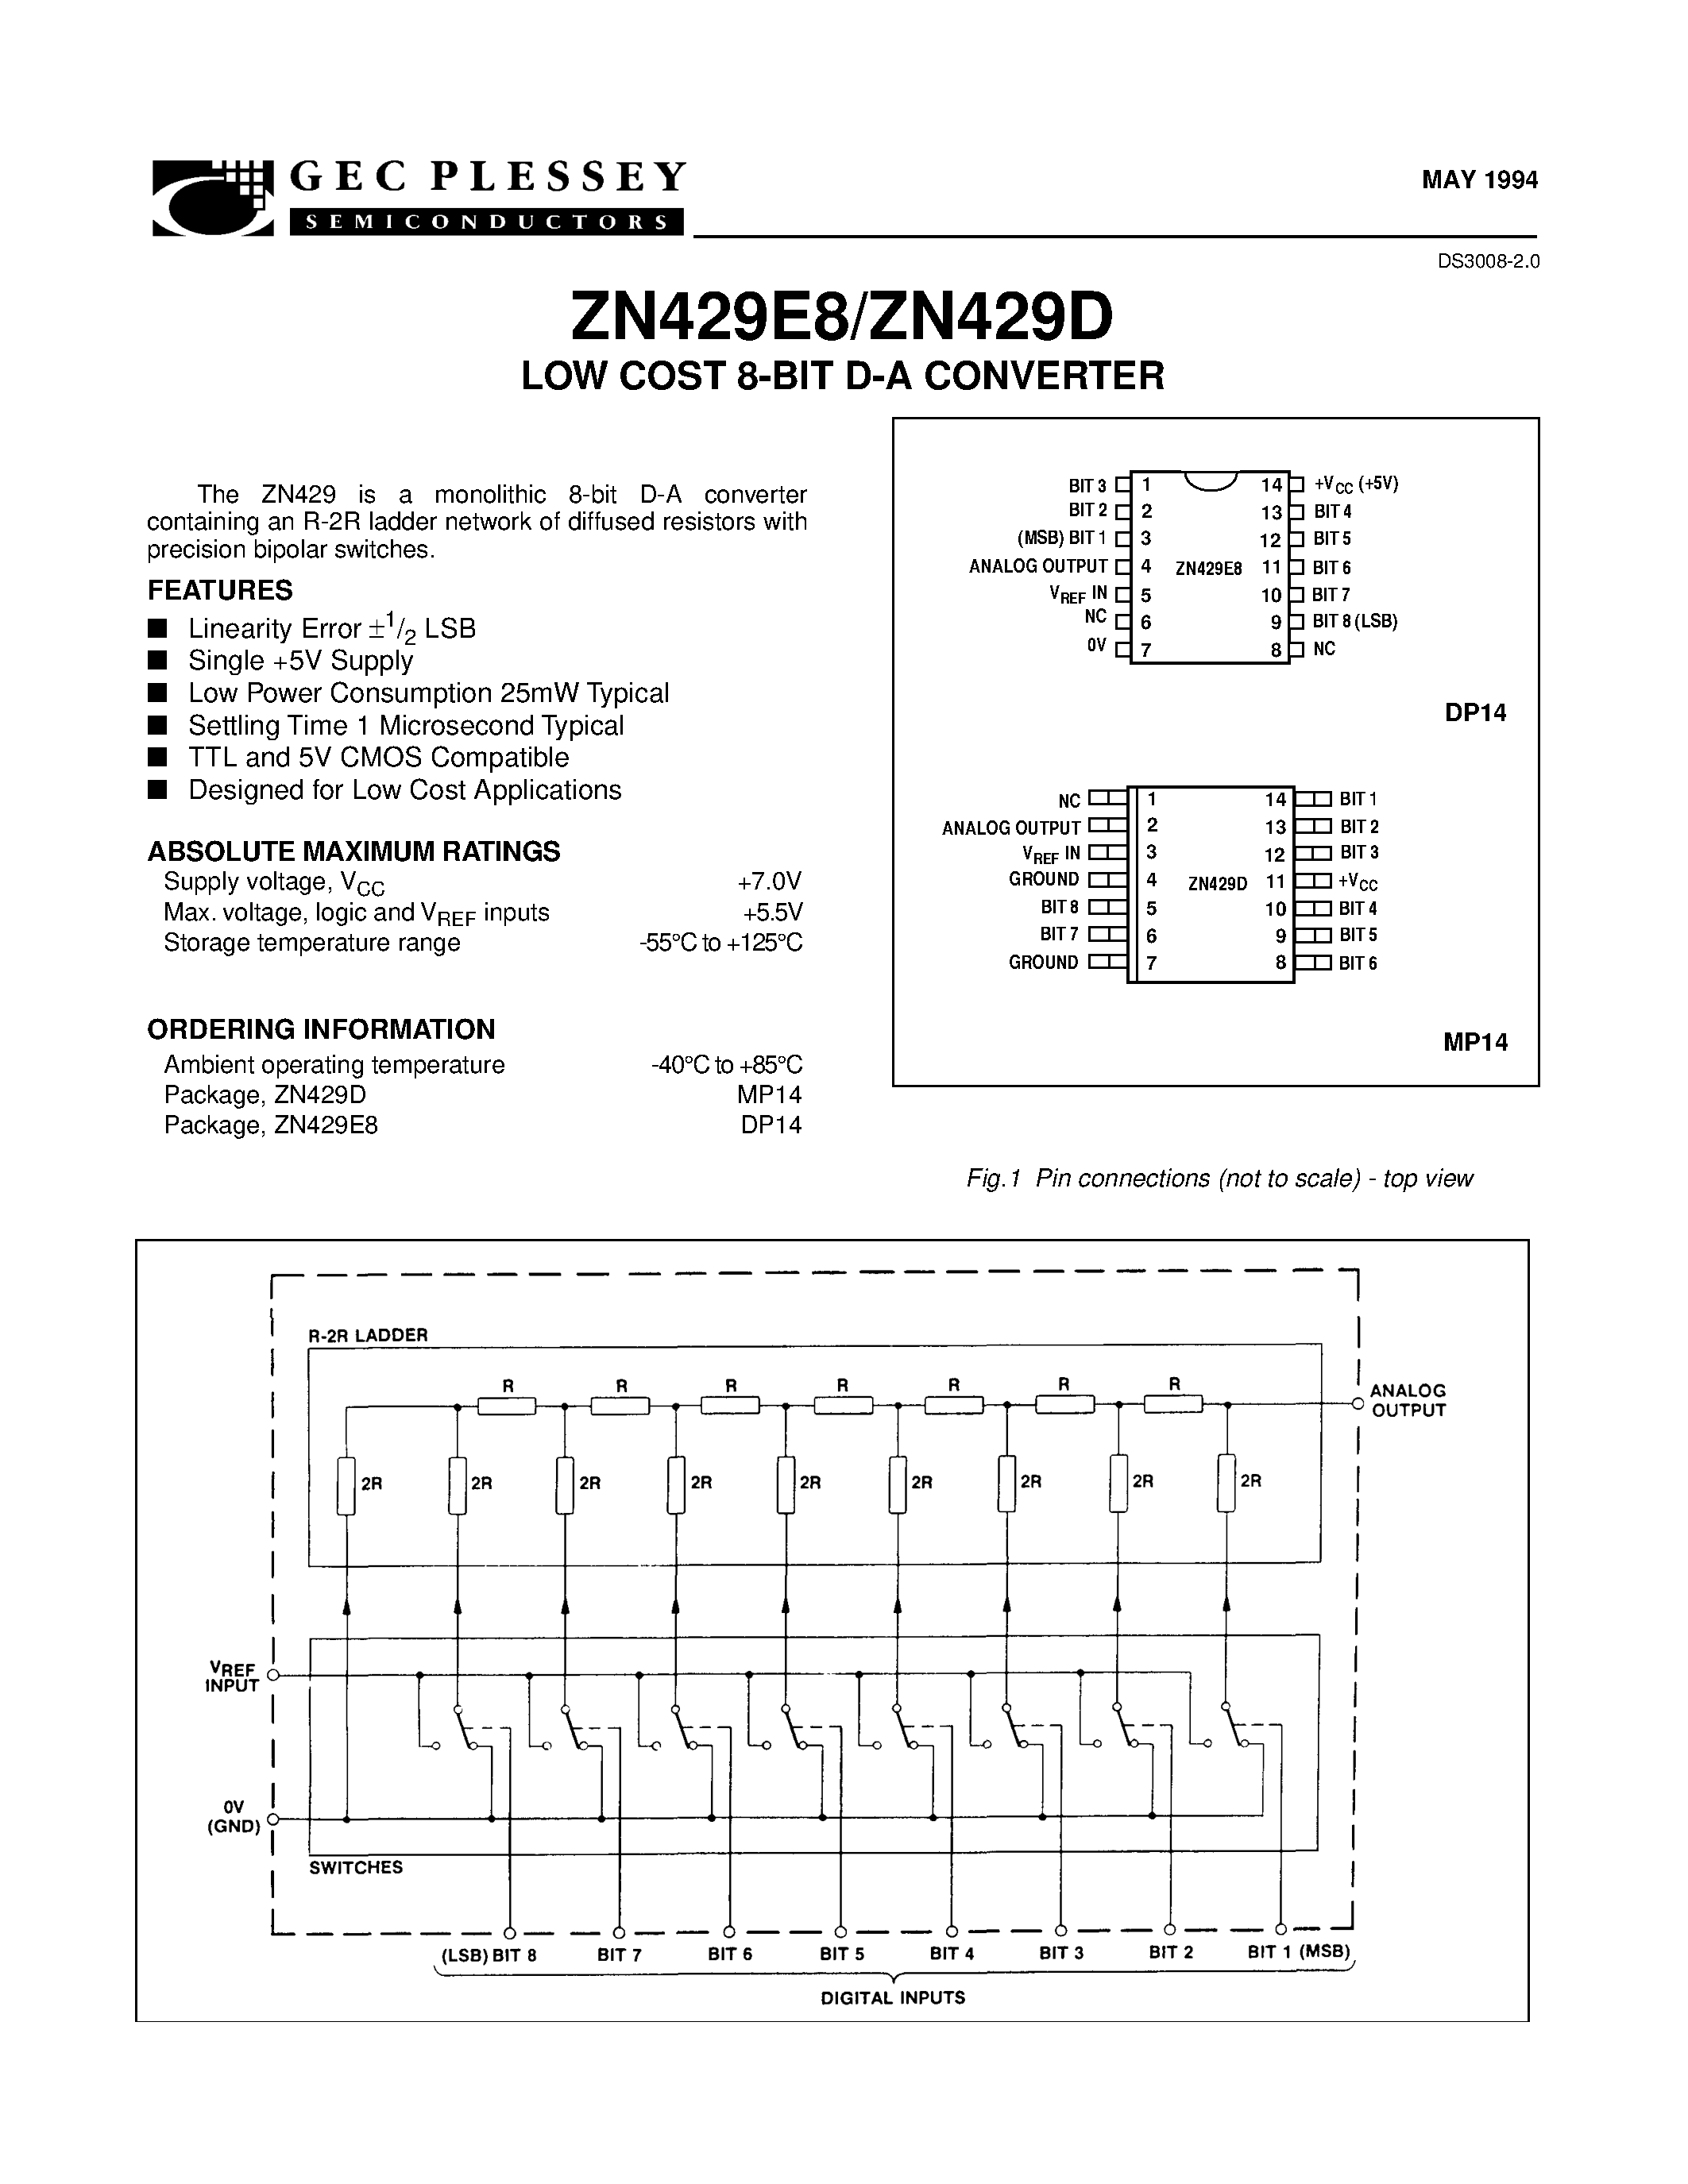 Datasheet ZN429 - LOW COST 8-BIT D-A CONVERTER page 2